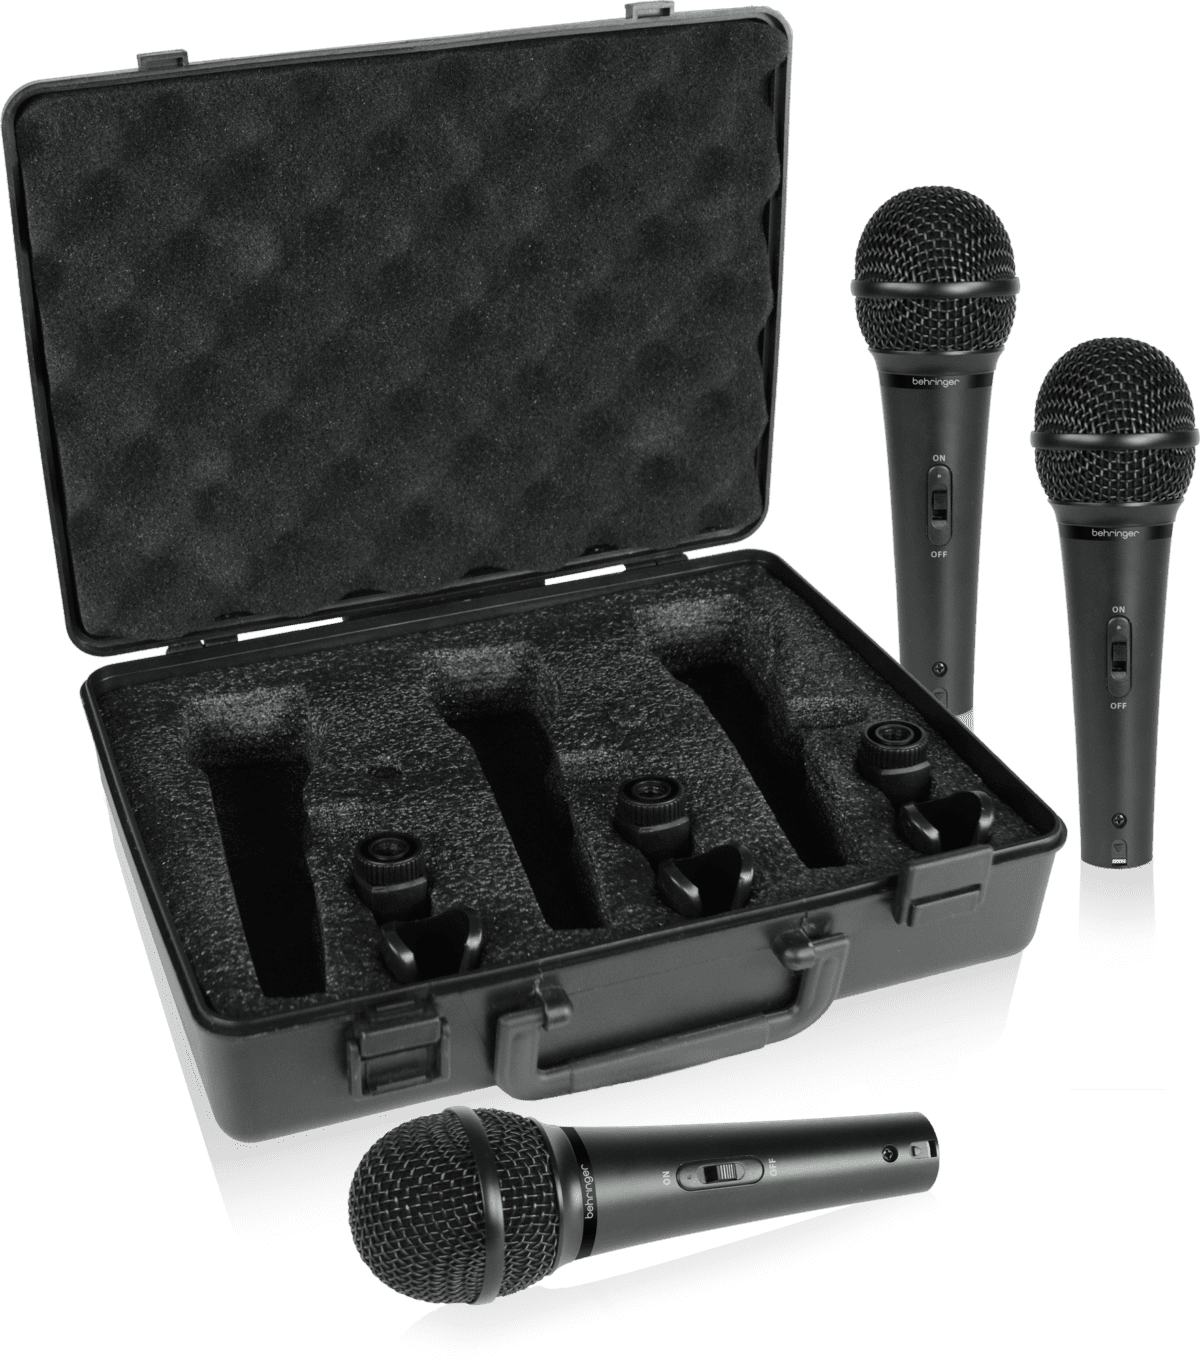 Behringer XM1800S Dynamic Microphone